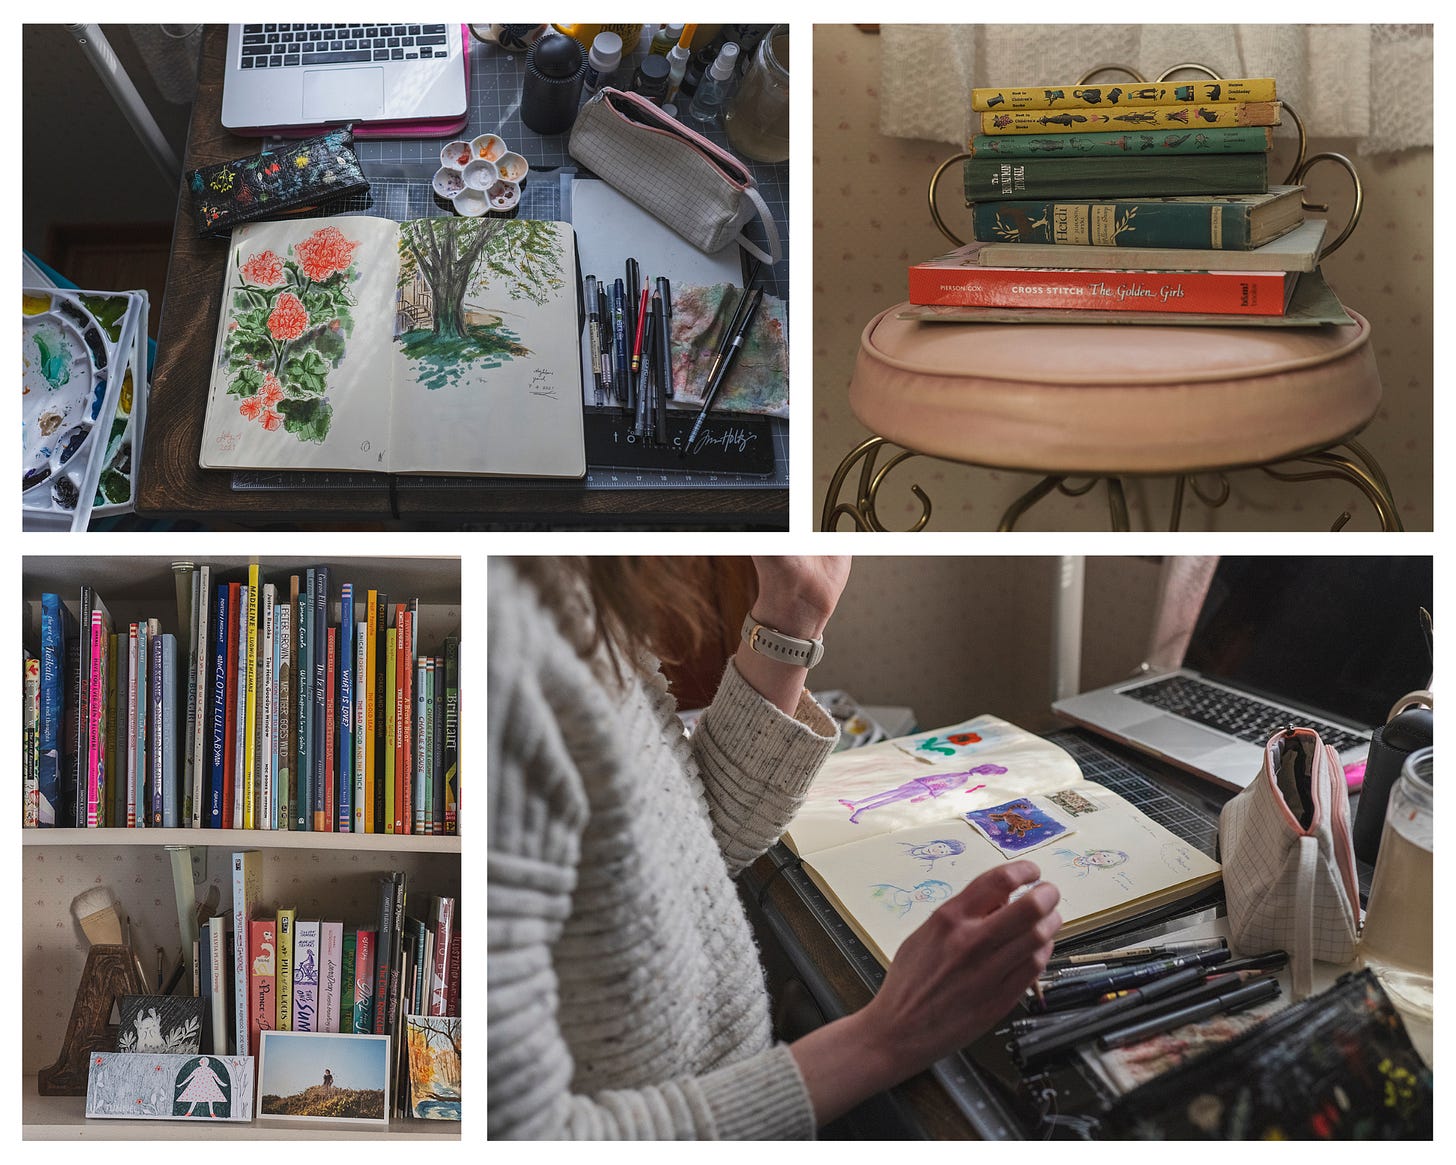 A photo collage of the artist's home studio. Clockwise from top left: an open sketchbook surrounded by art materials lies on a desk. A stack of books sits on a pink chair. The artist's hands flip through a sketchbook at a desk filled with art materials. A closeup shot of shelves lined with books, knickknacks, and photographs.